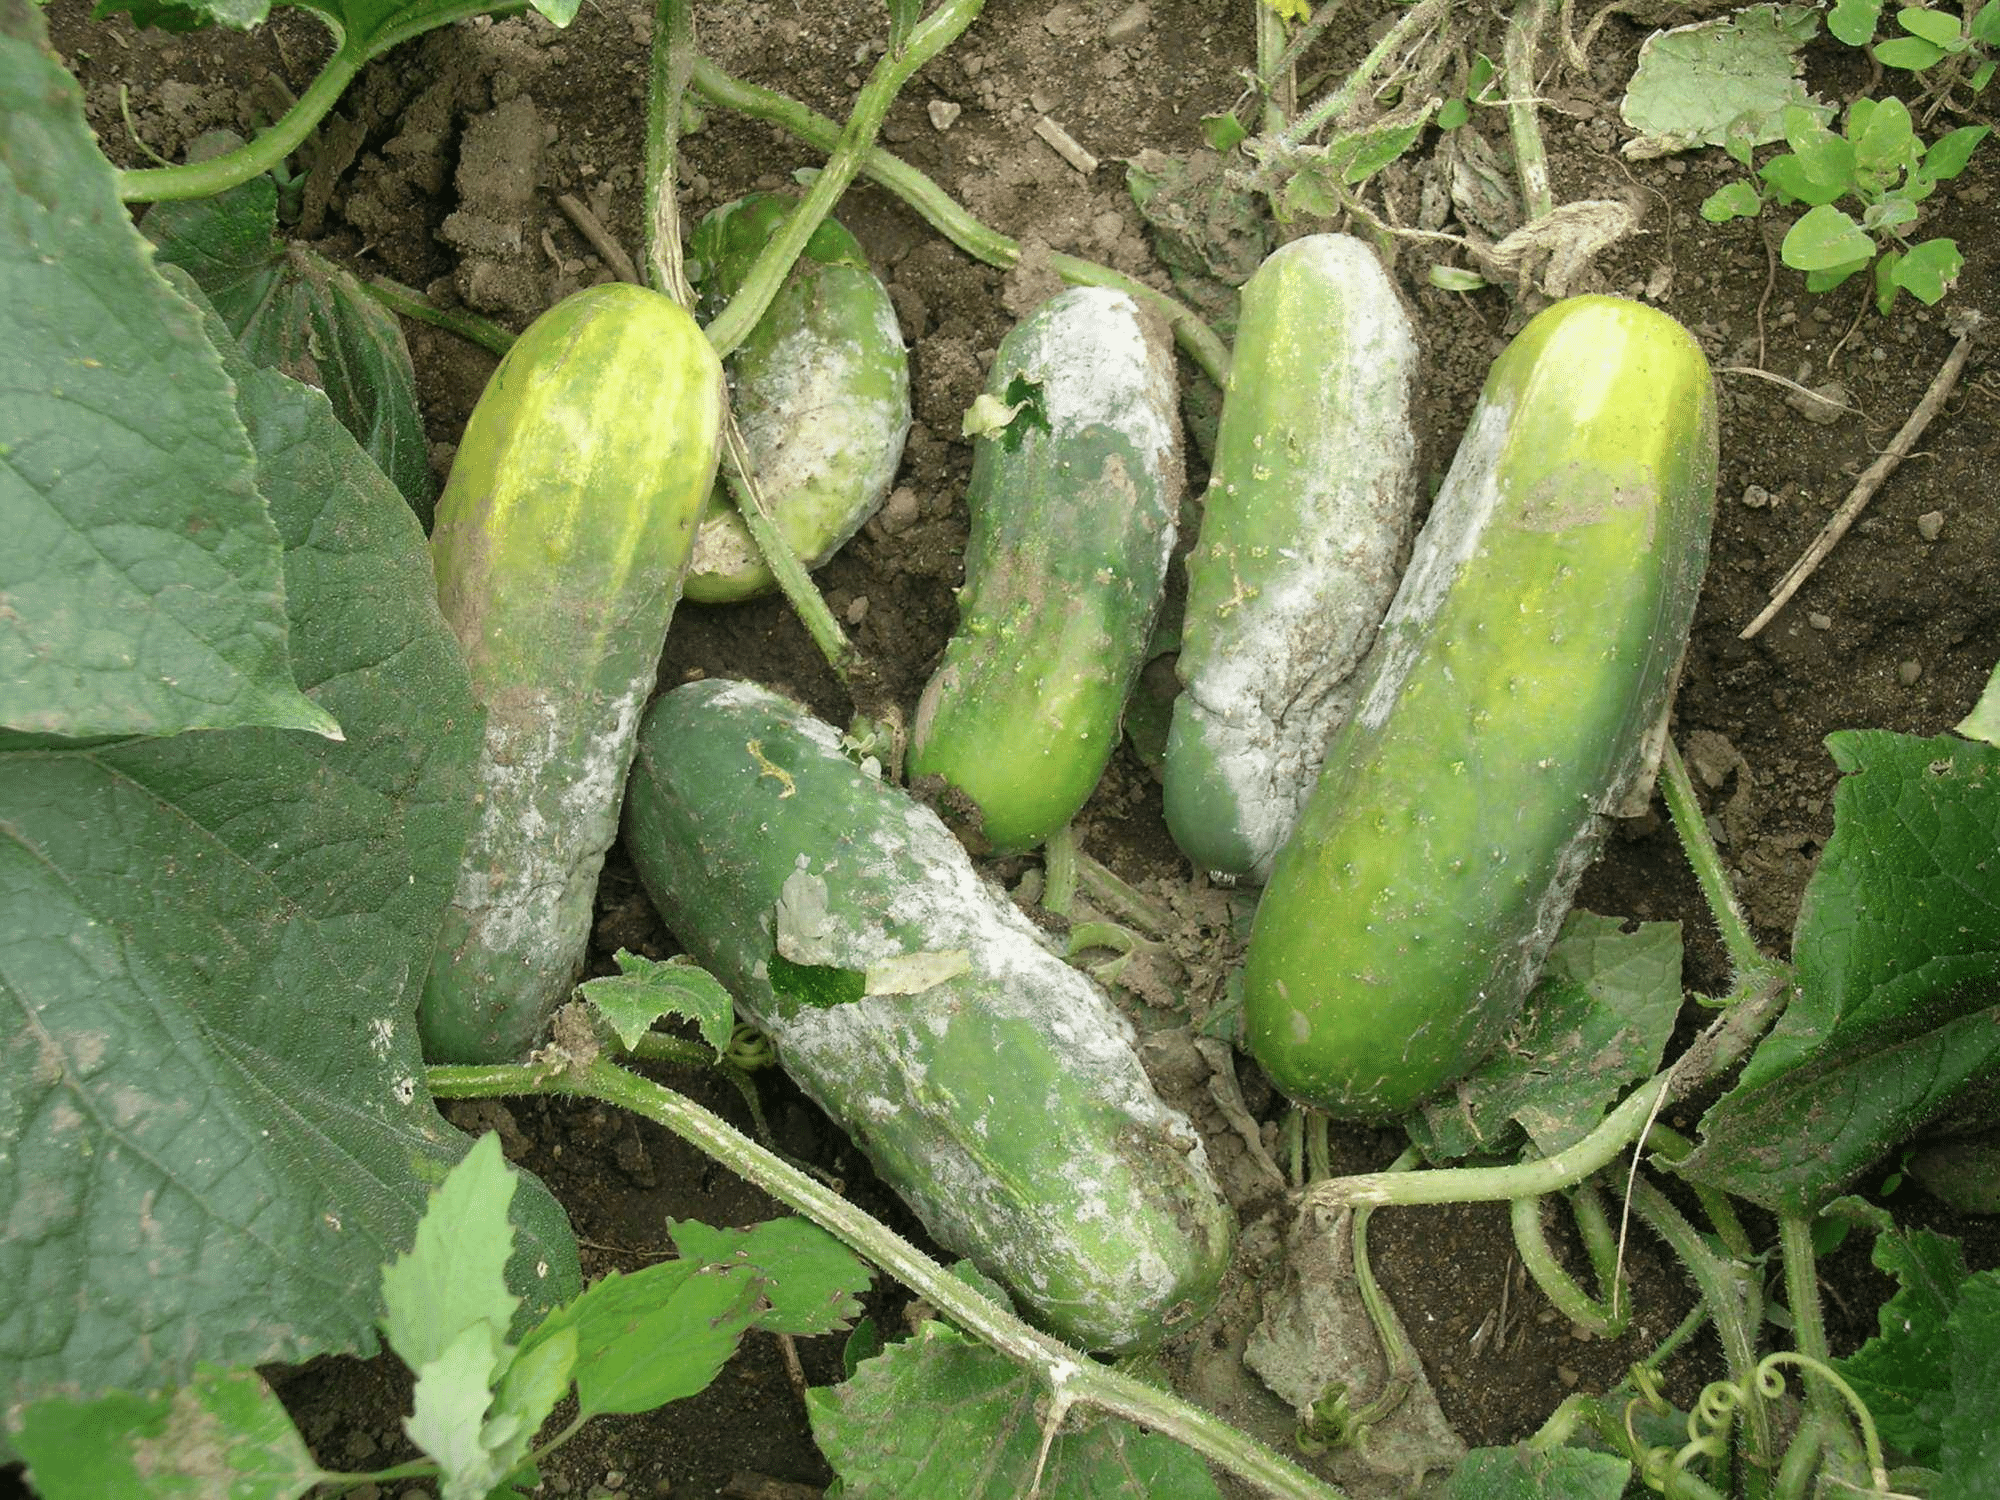 Cucumbers with fungal disease